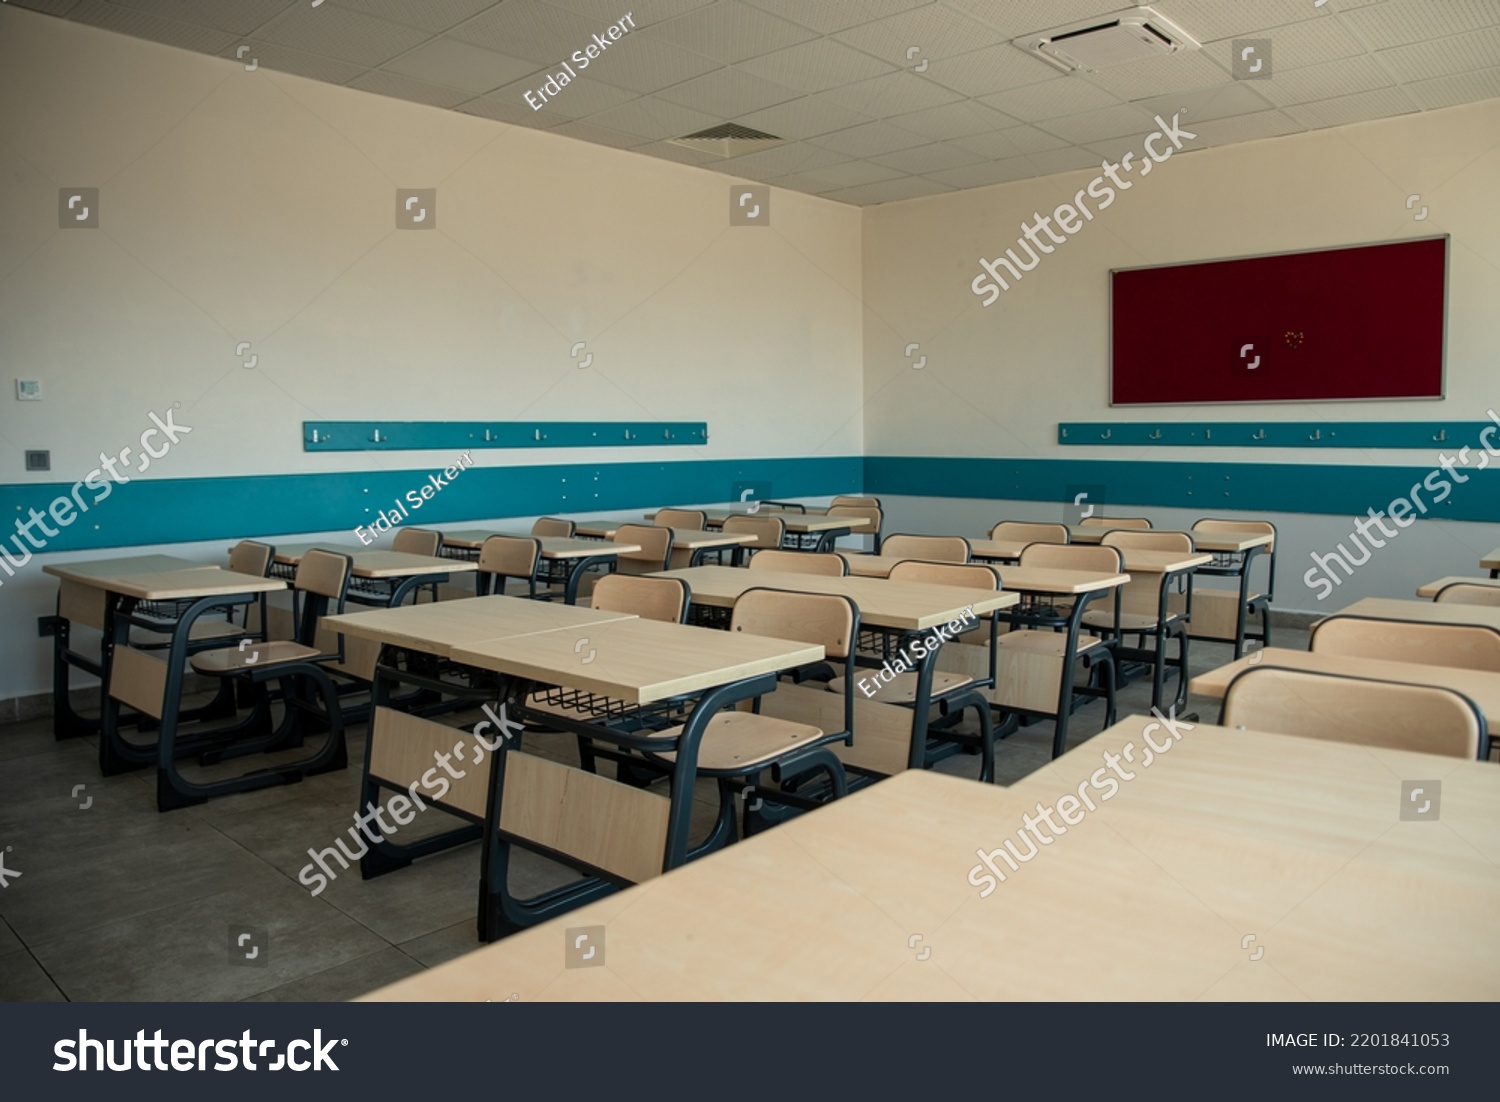 Classroom Background Without No Student Teacher Stock Photo 2201841053